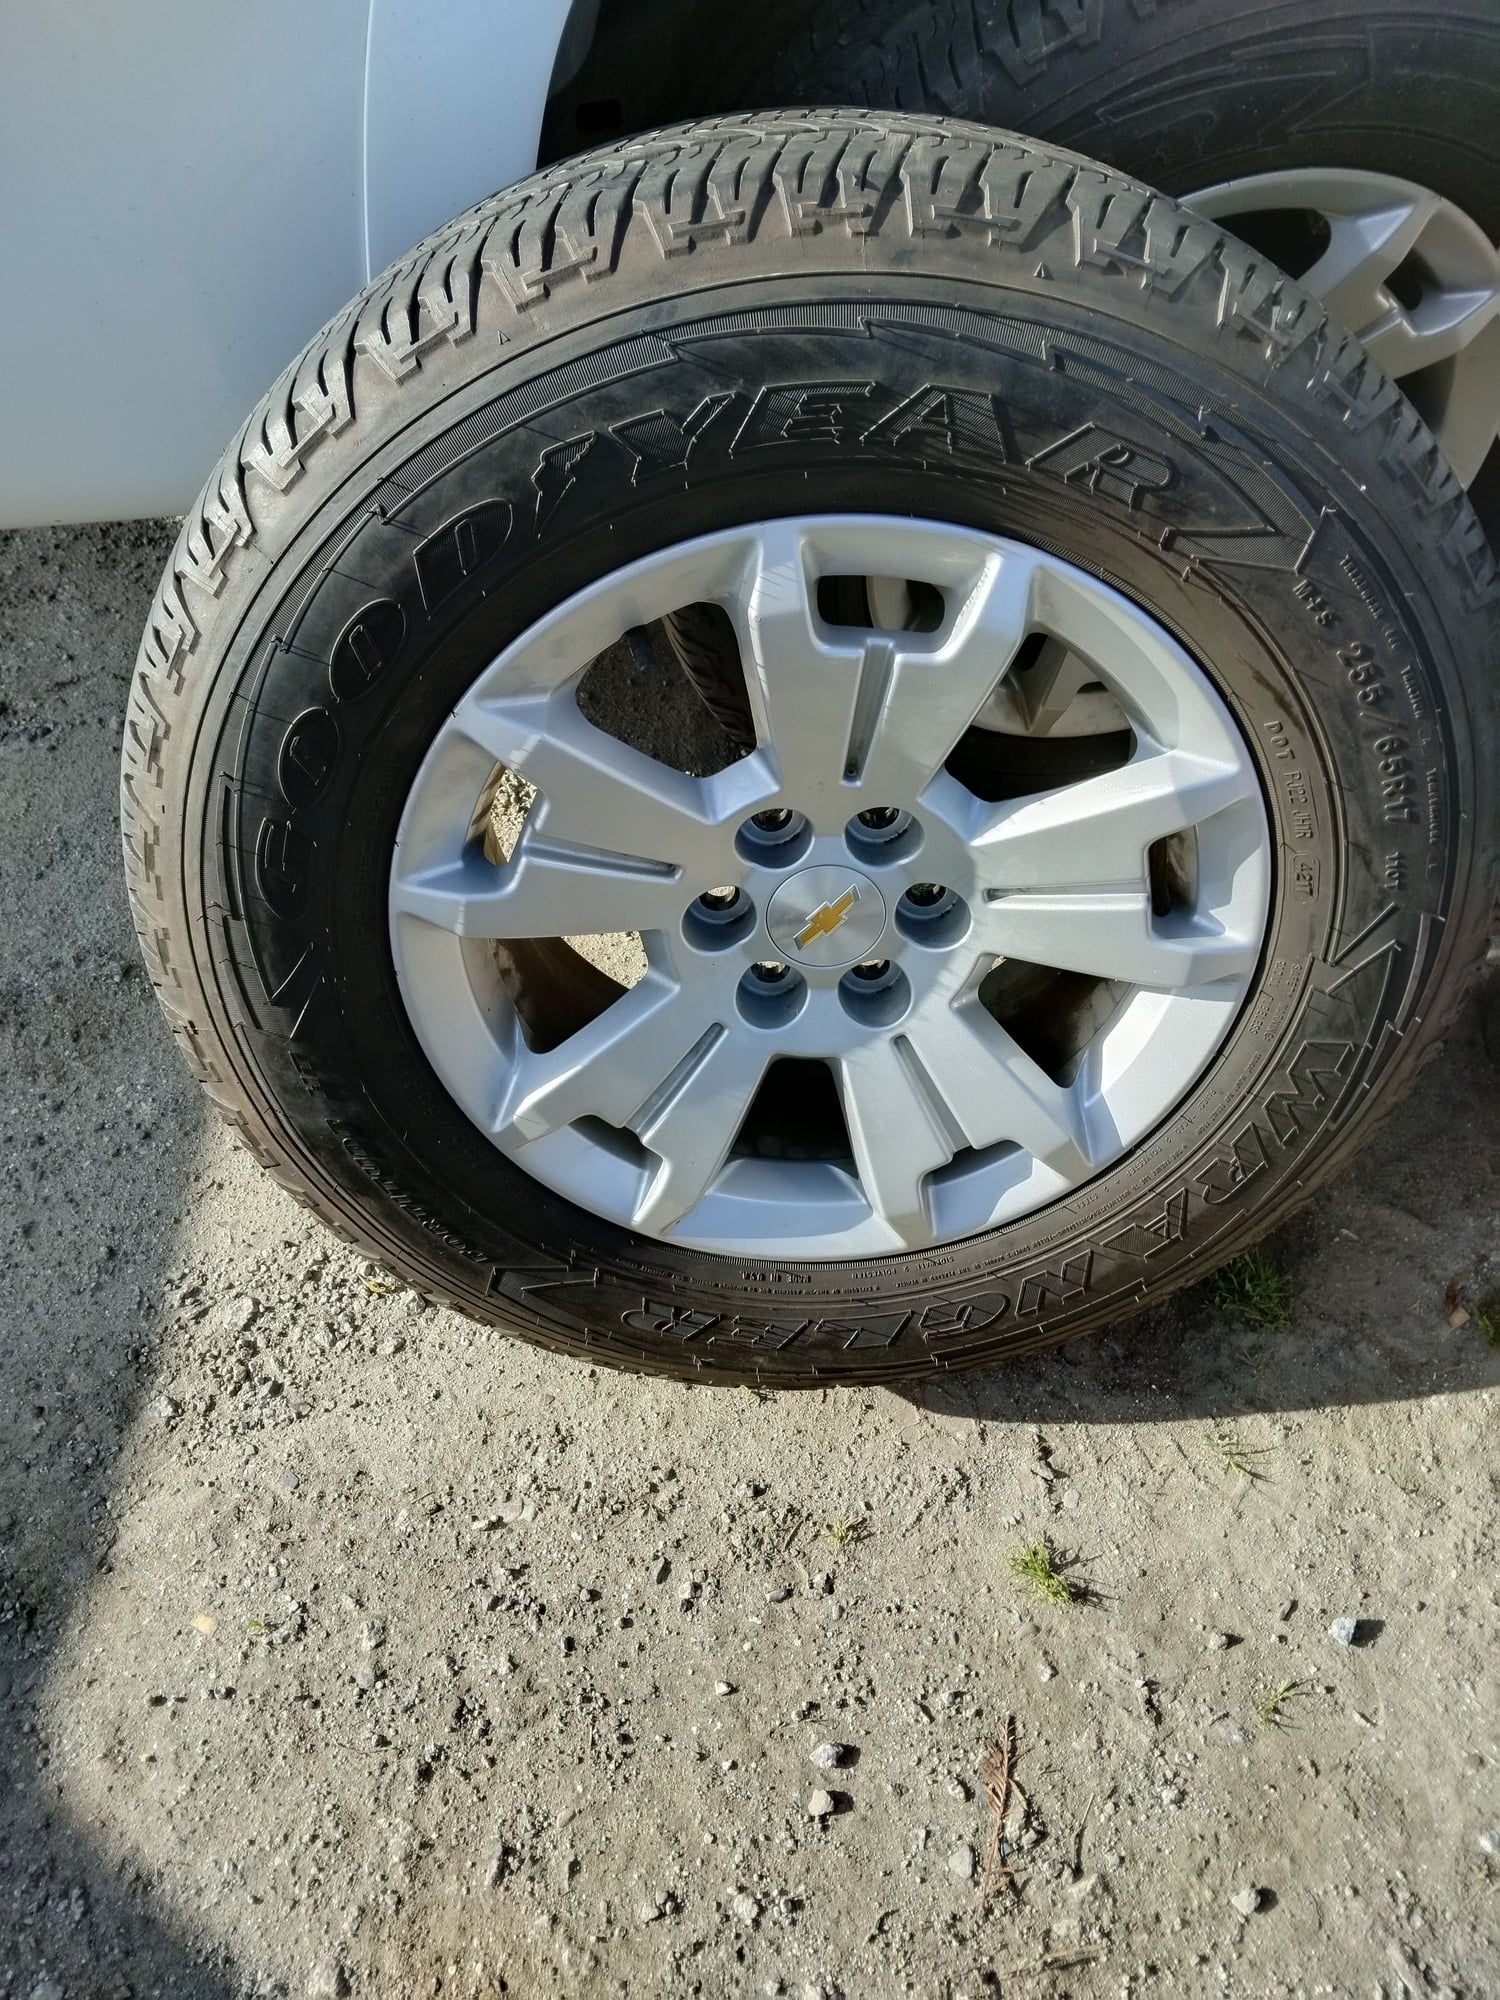 Wheels and Tires/Axles - 4 Chevy rims and tires for sale 6lug - New - All Years Chevrolet All Models - Hollister, CA 95023, United States